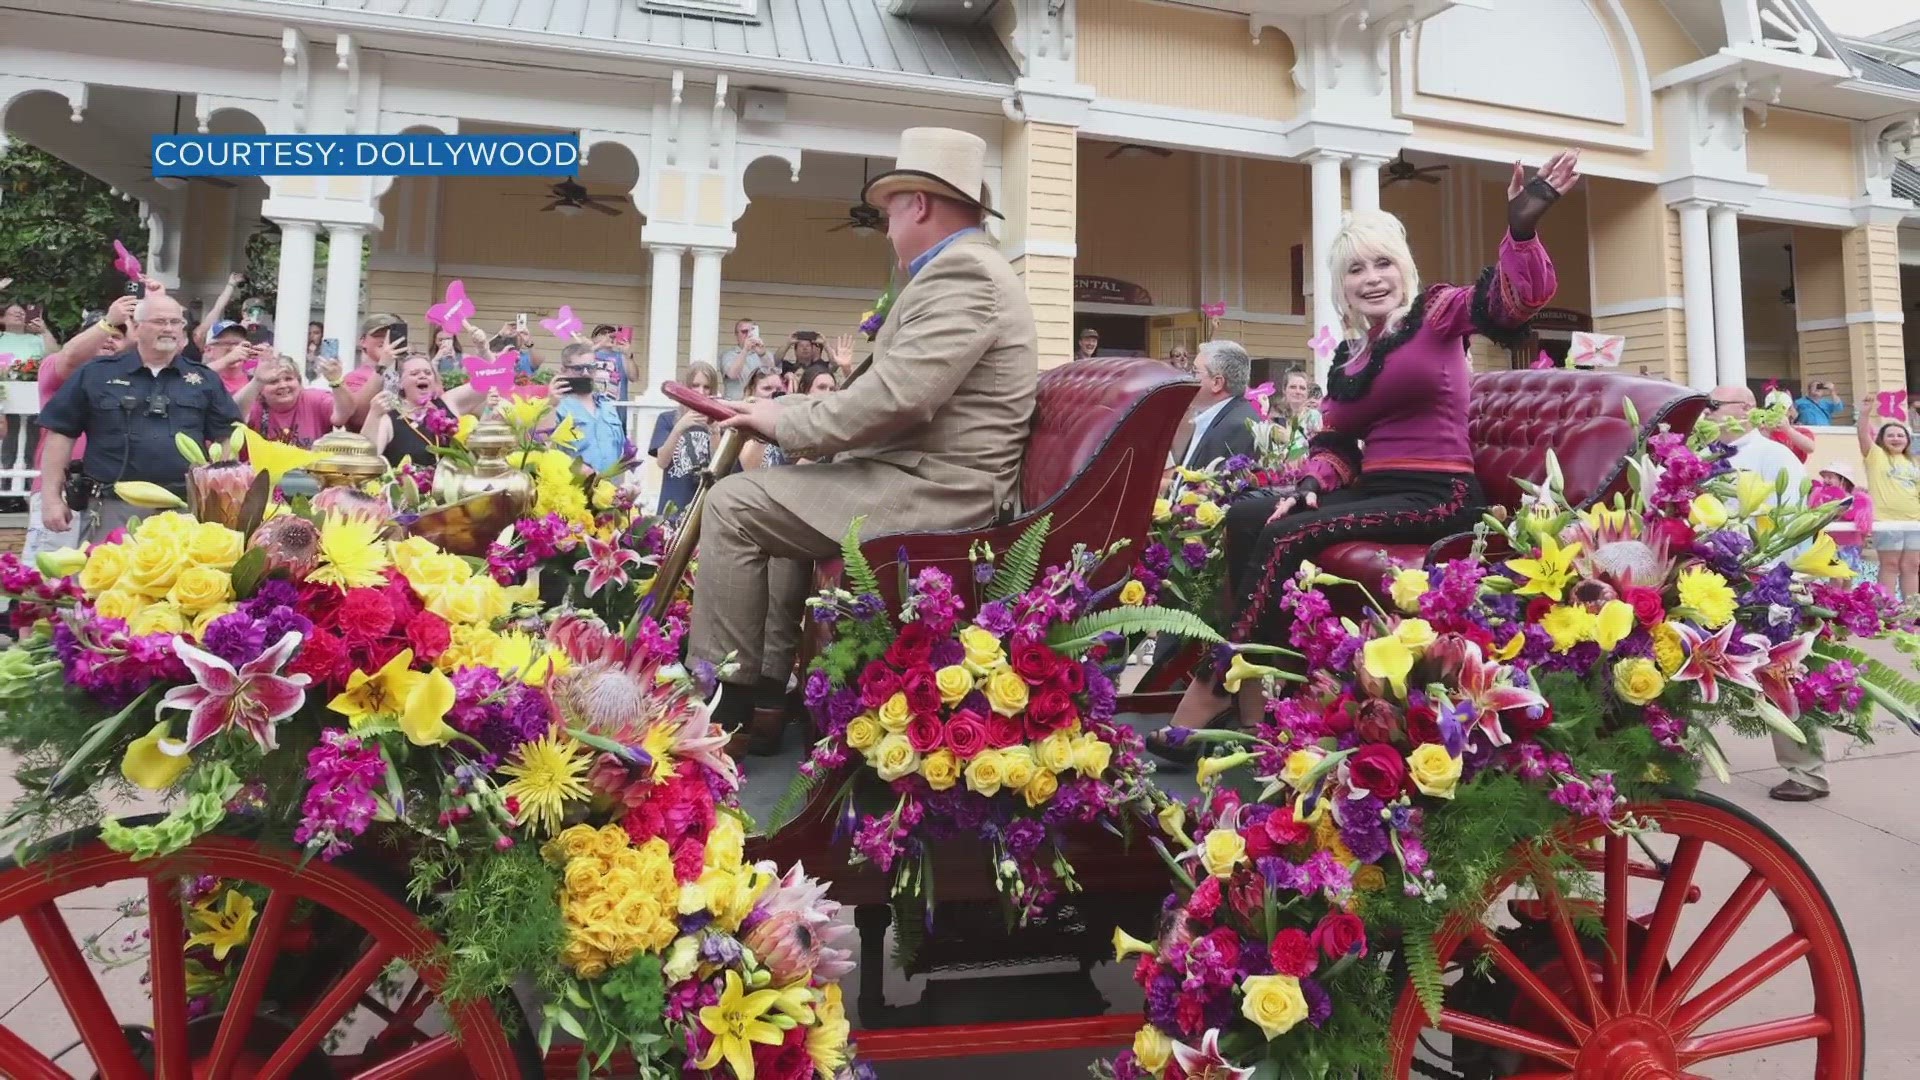 Random Acts of Flowers will receive flowers that once rode alongside Dolly Parton herself.